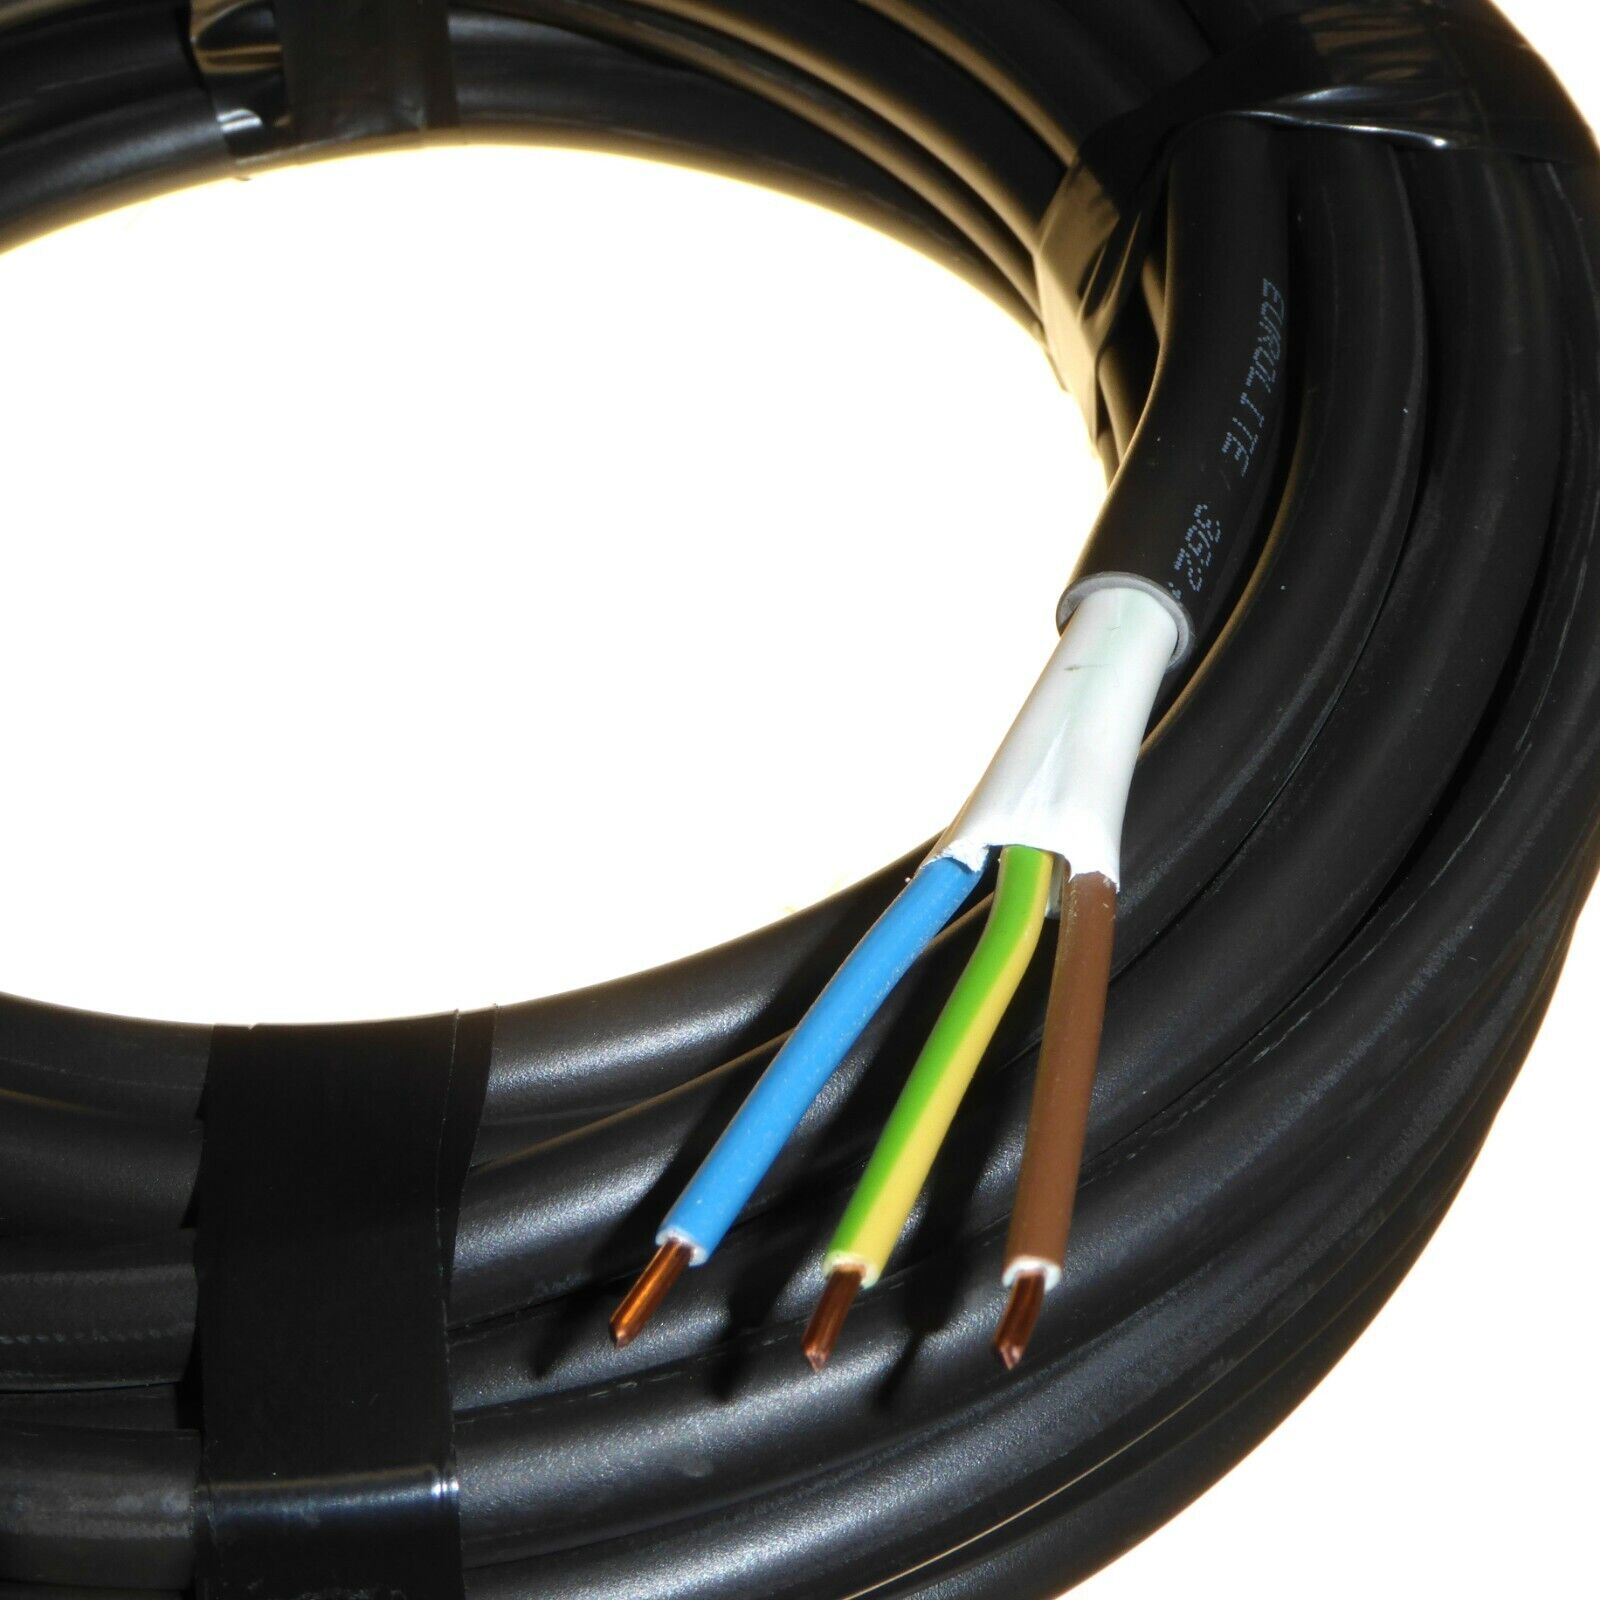 0.6/1kv NYY-J 3G4.0 mm2 Copper conductor PVC insulated PVC sheathed power cable